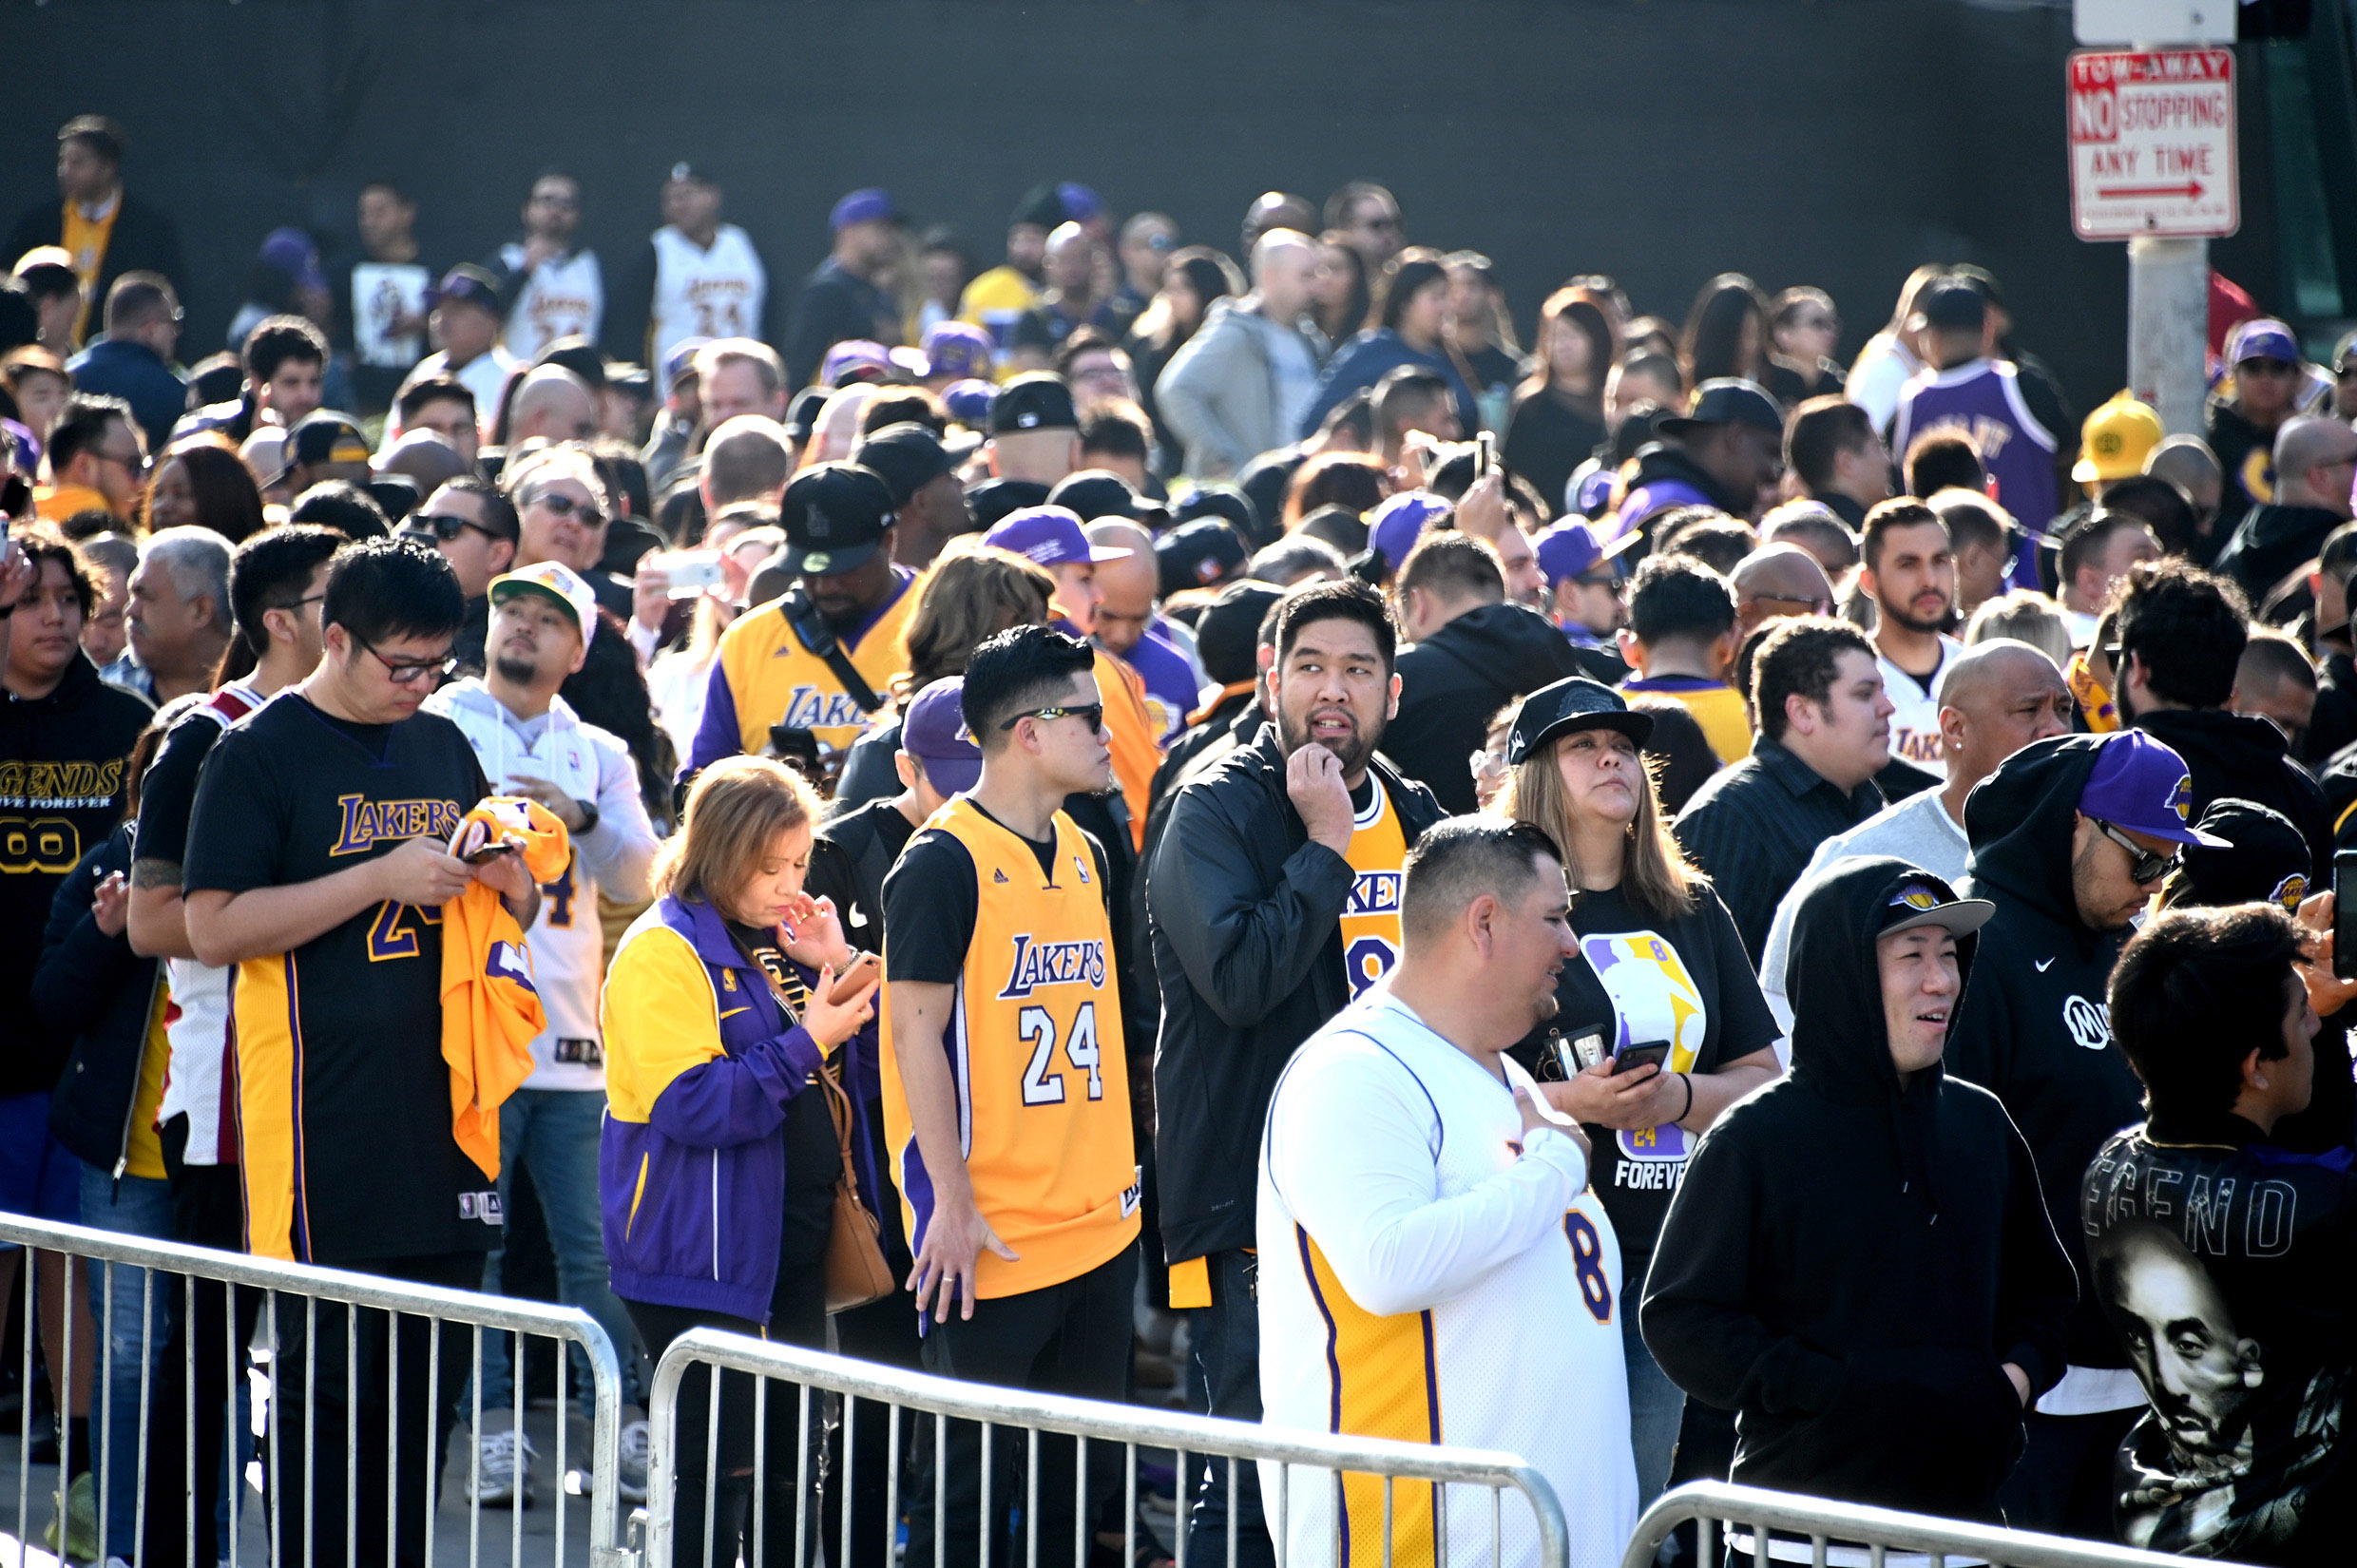 PHOTO: Fans line up outside to Staples Center waiting to enter to attend the memorial to celebrate the life of Kobe Bryant and daughter Gianna Bryant, Los Angeles, Feb. 24, 2020.